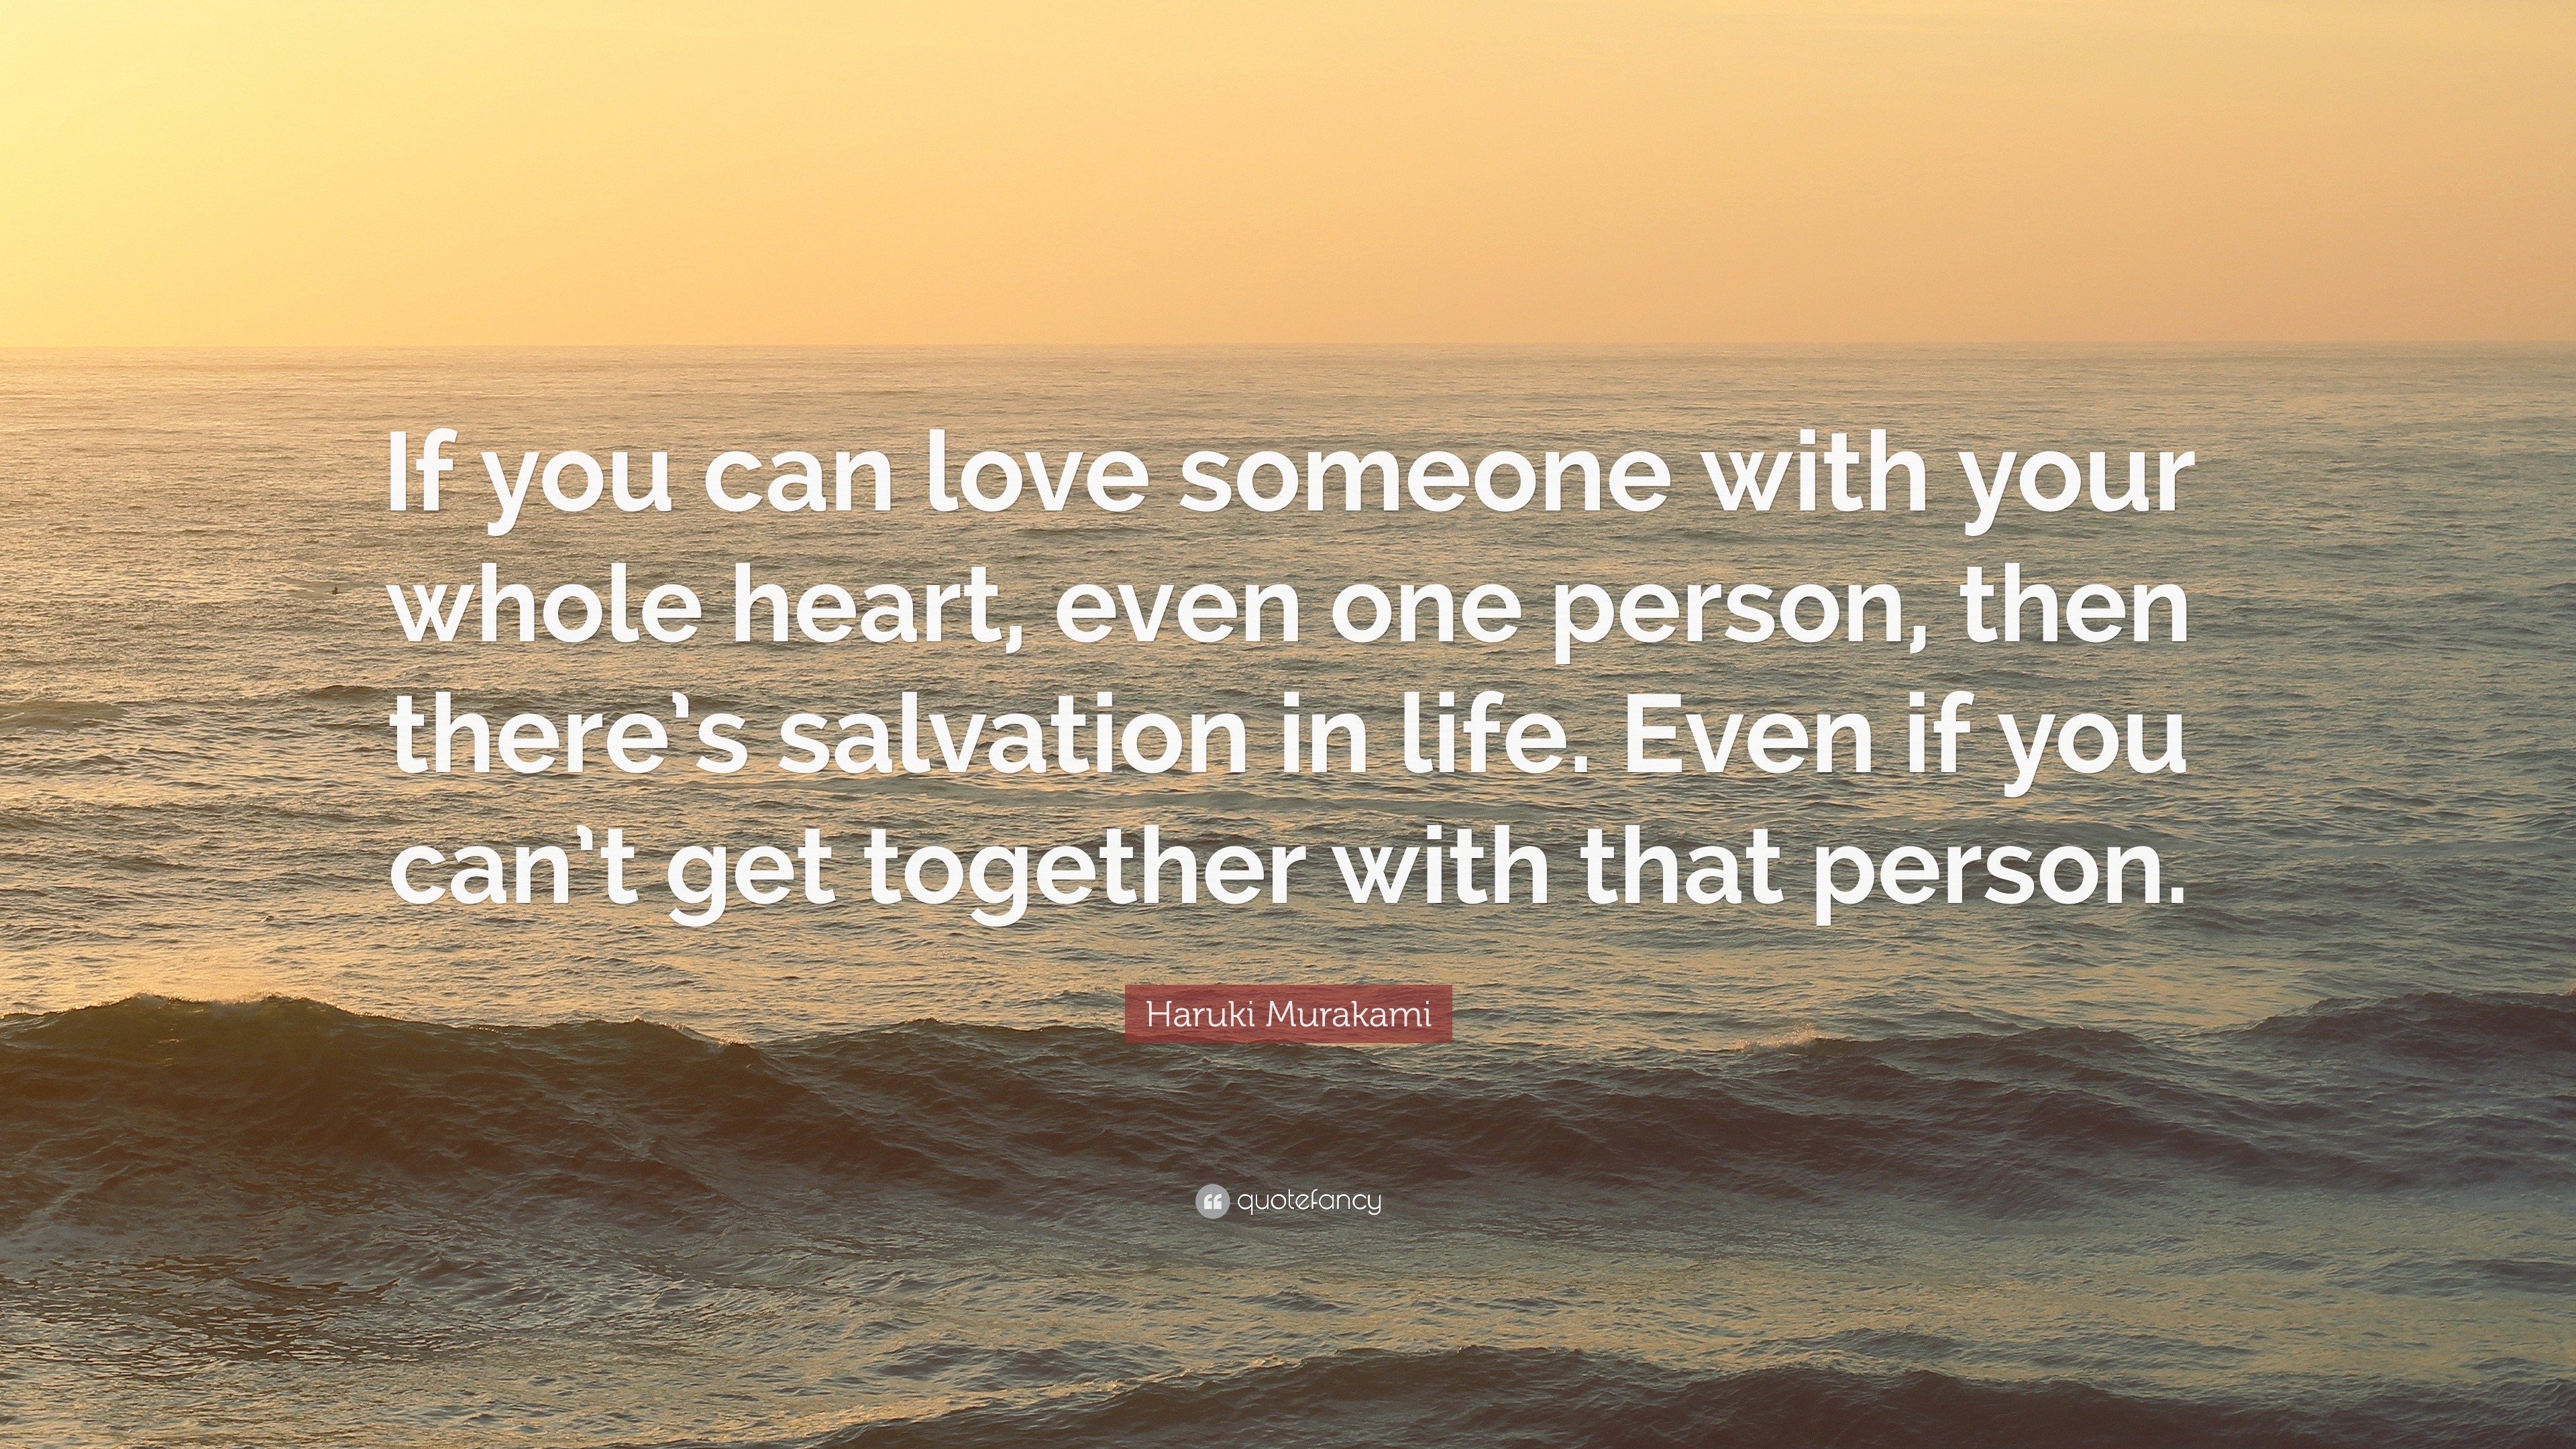 Haruki Murakami Quote “If you can love someone with your whole heart even